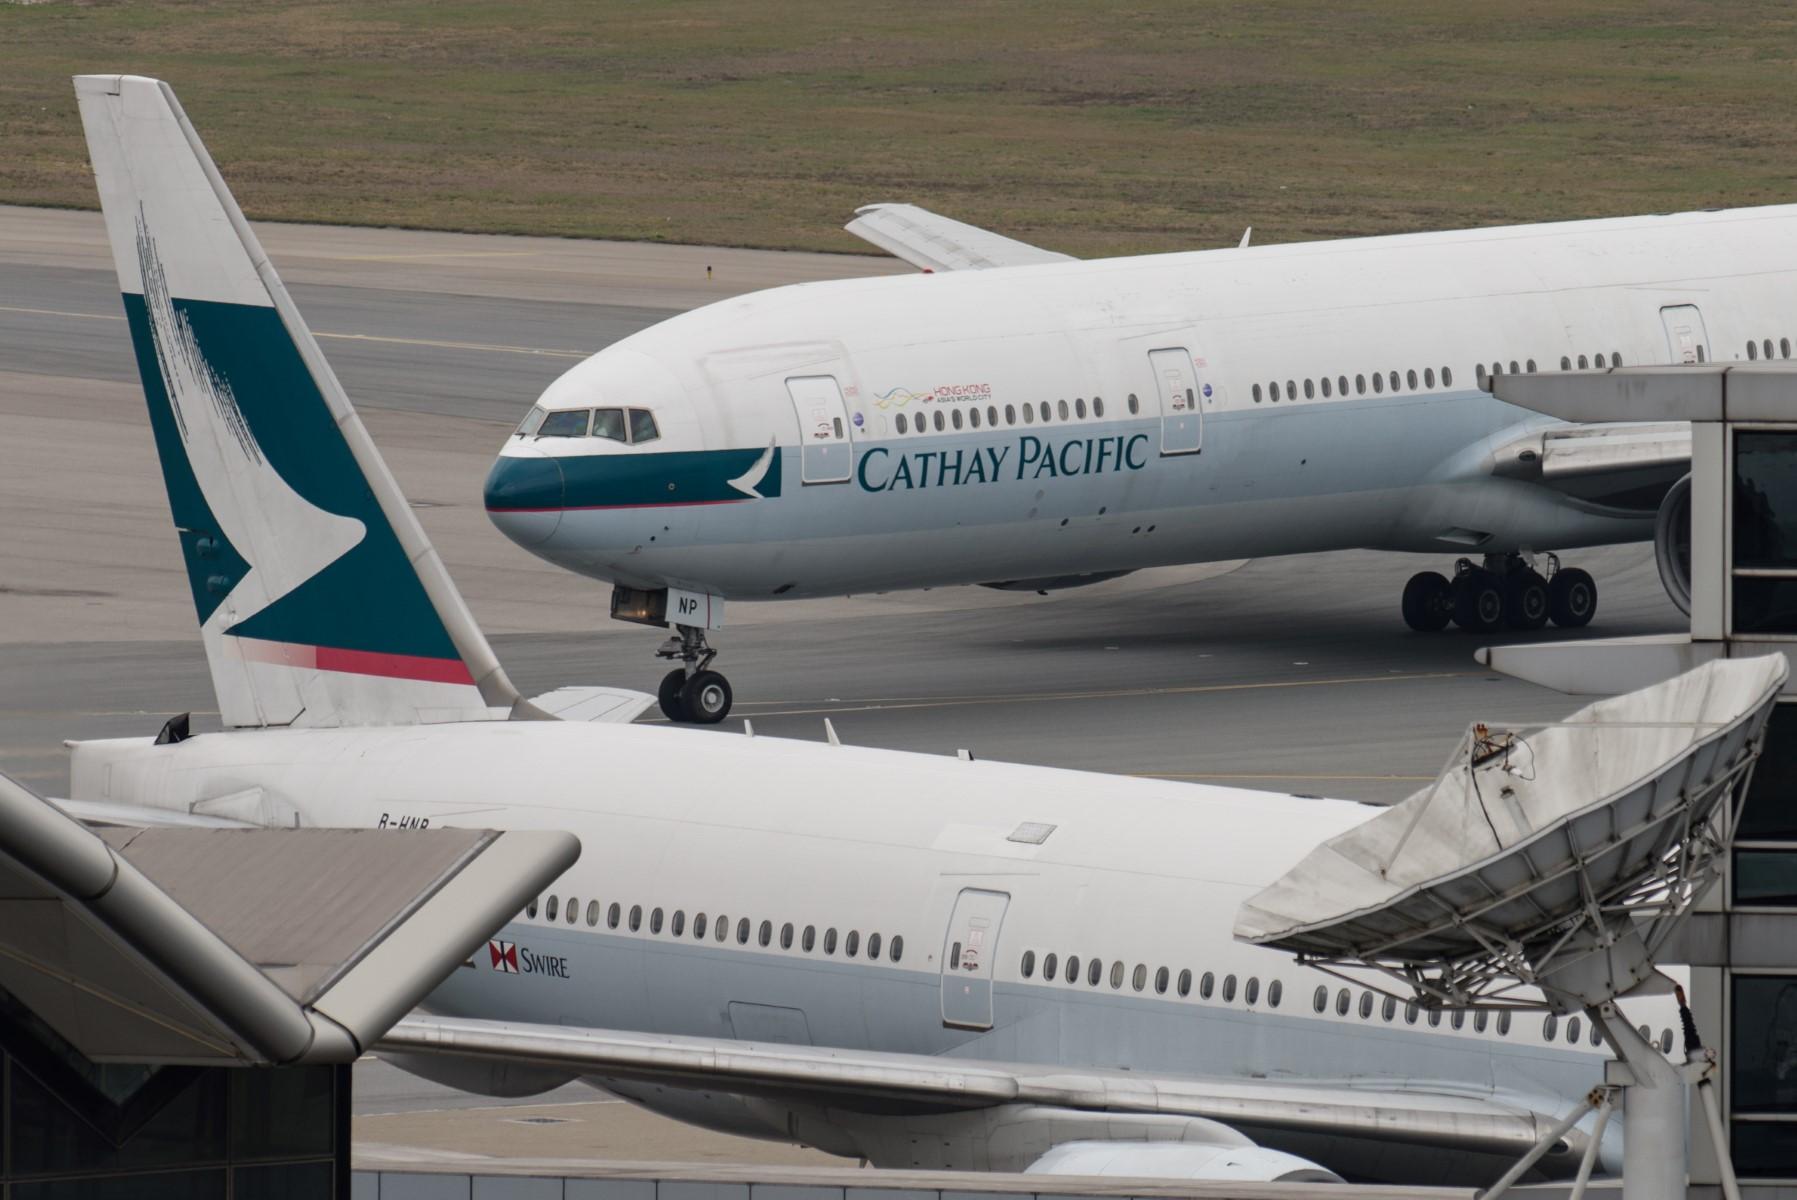 This file photo taken on March 15, 2017 shows a Cathay Pacific Boeing 777 passenger aircraft (top) taxiing past a stationary plane on the tarmac at the international airport in Hong Kong. Photo: AFP